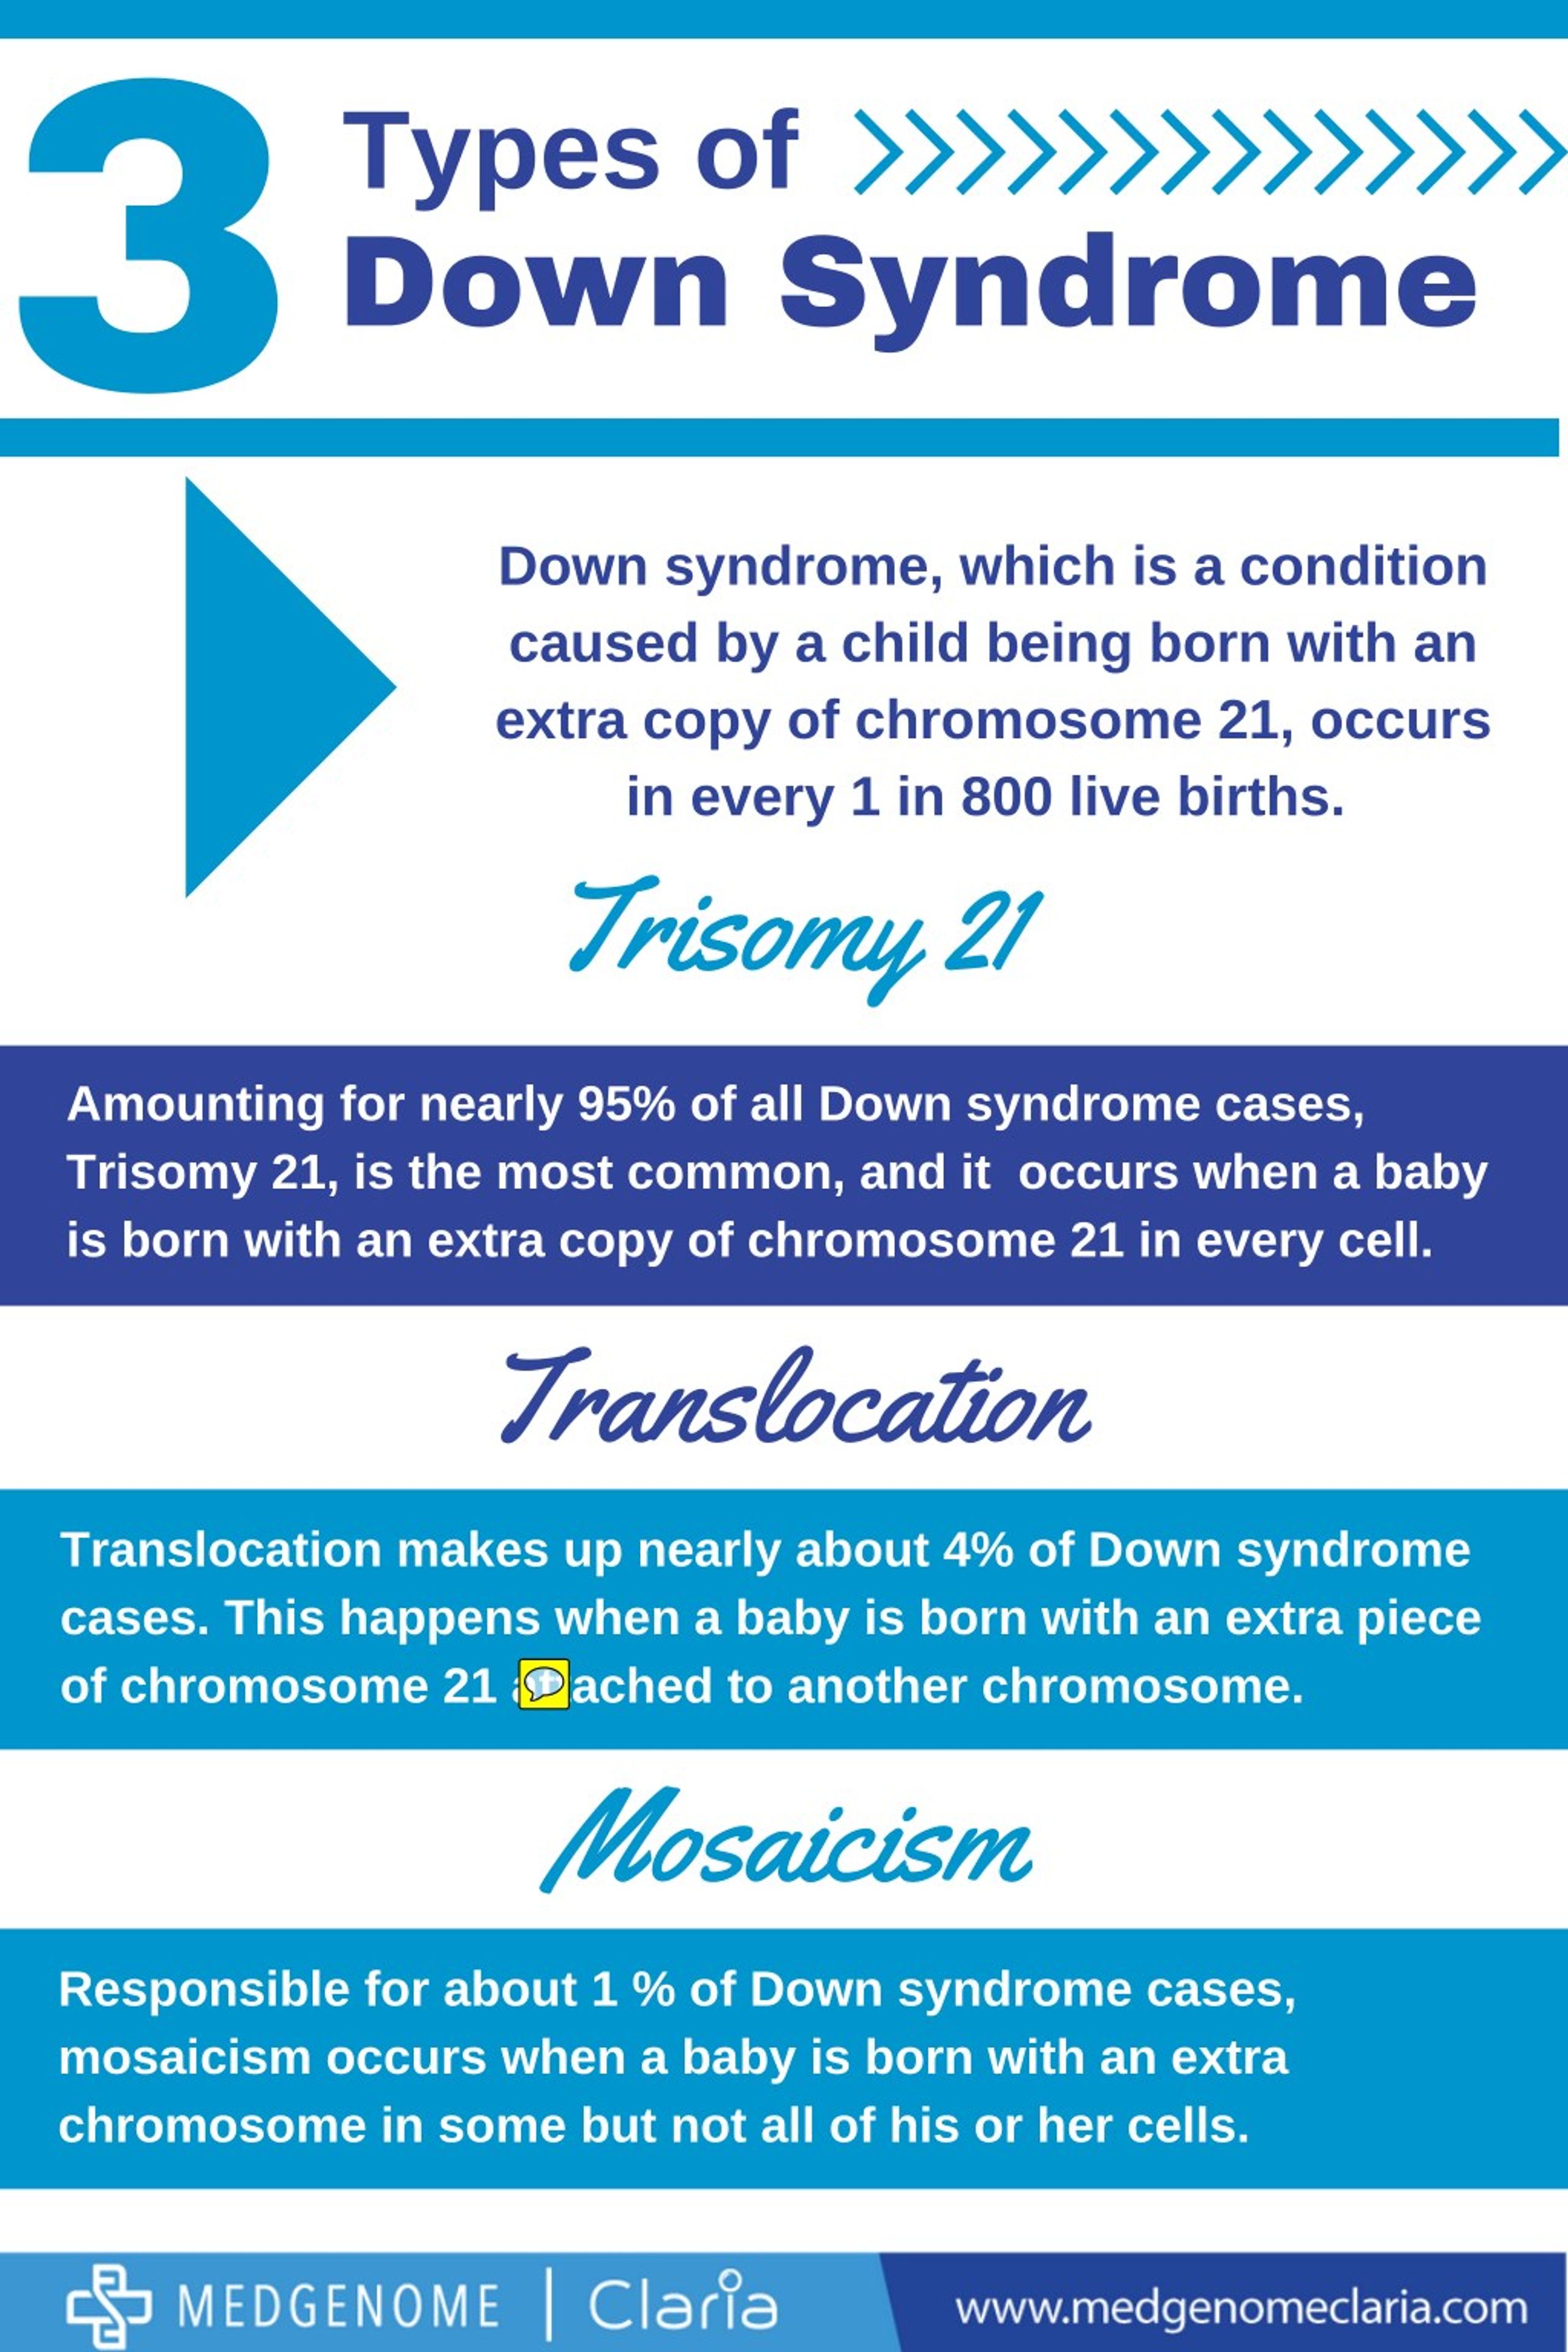 what are the 3 types of down syndrome